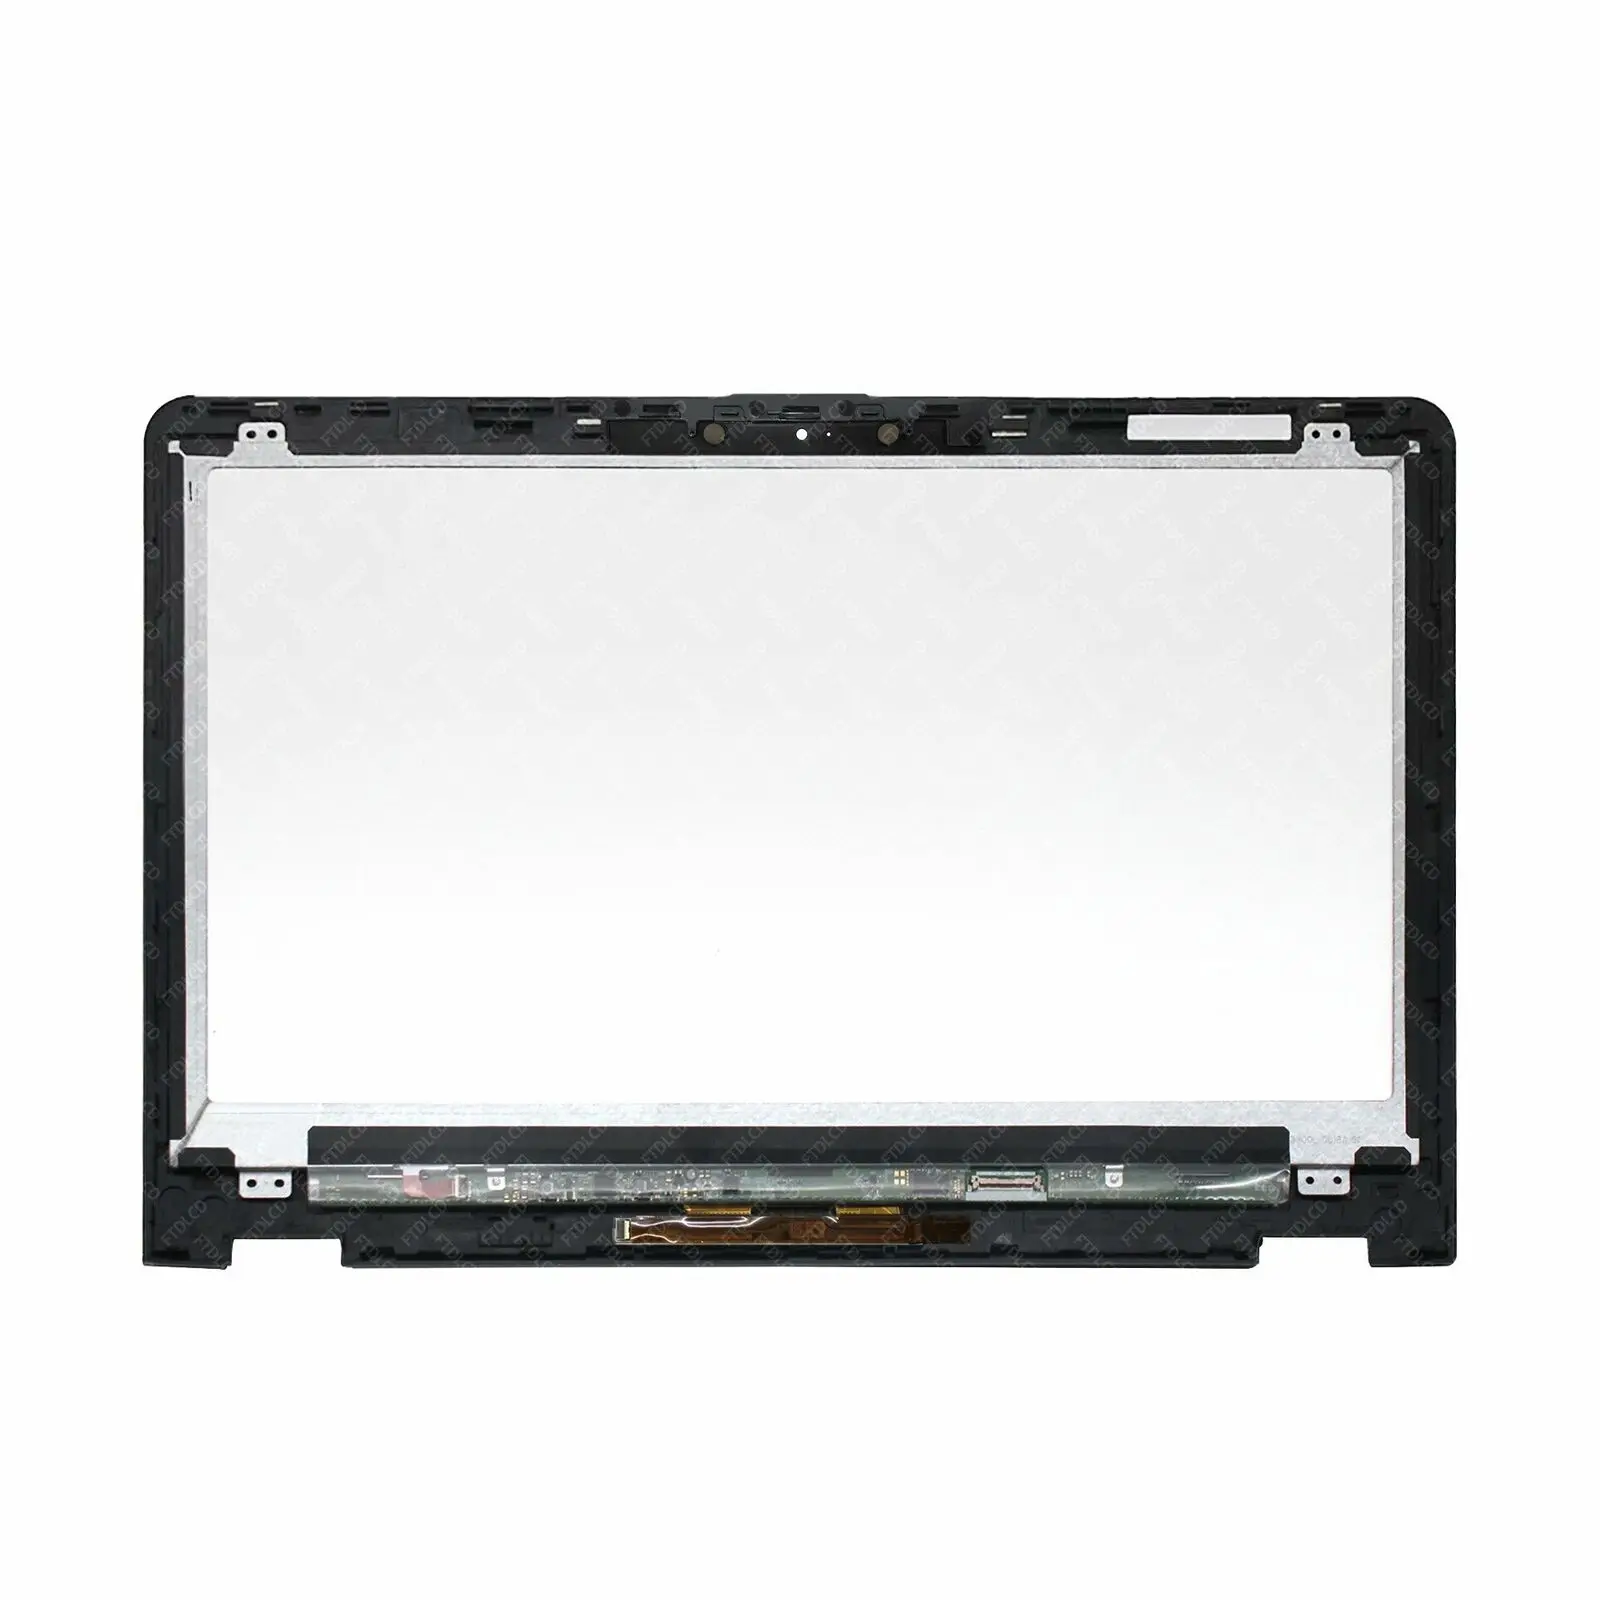 jianglun for hp envy x360 m6 aq105dx 15 6 lcd touch screen assembly silver bezel 1080p free global shipping